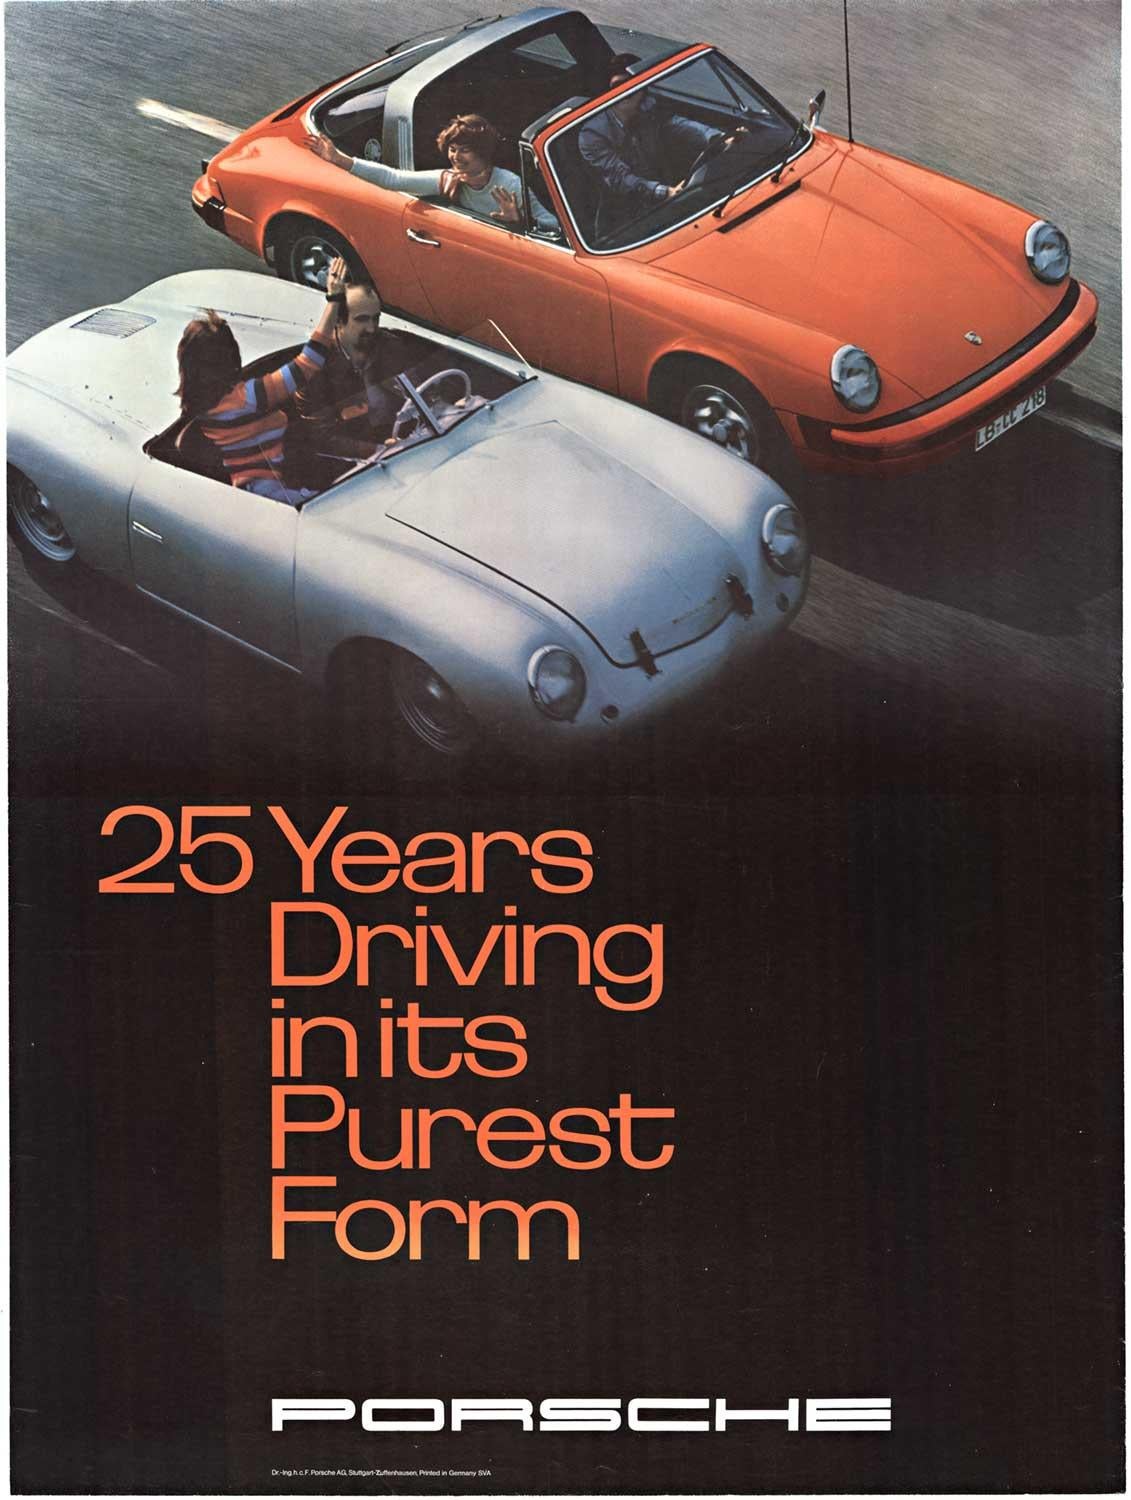 Original Porsche '25 Years Driving in its Purest Form' vintage factory poster